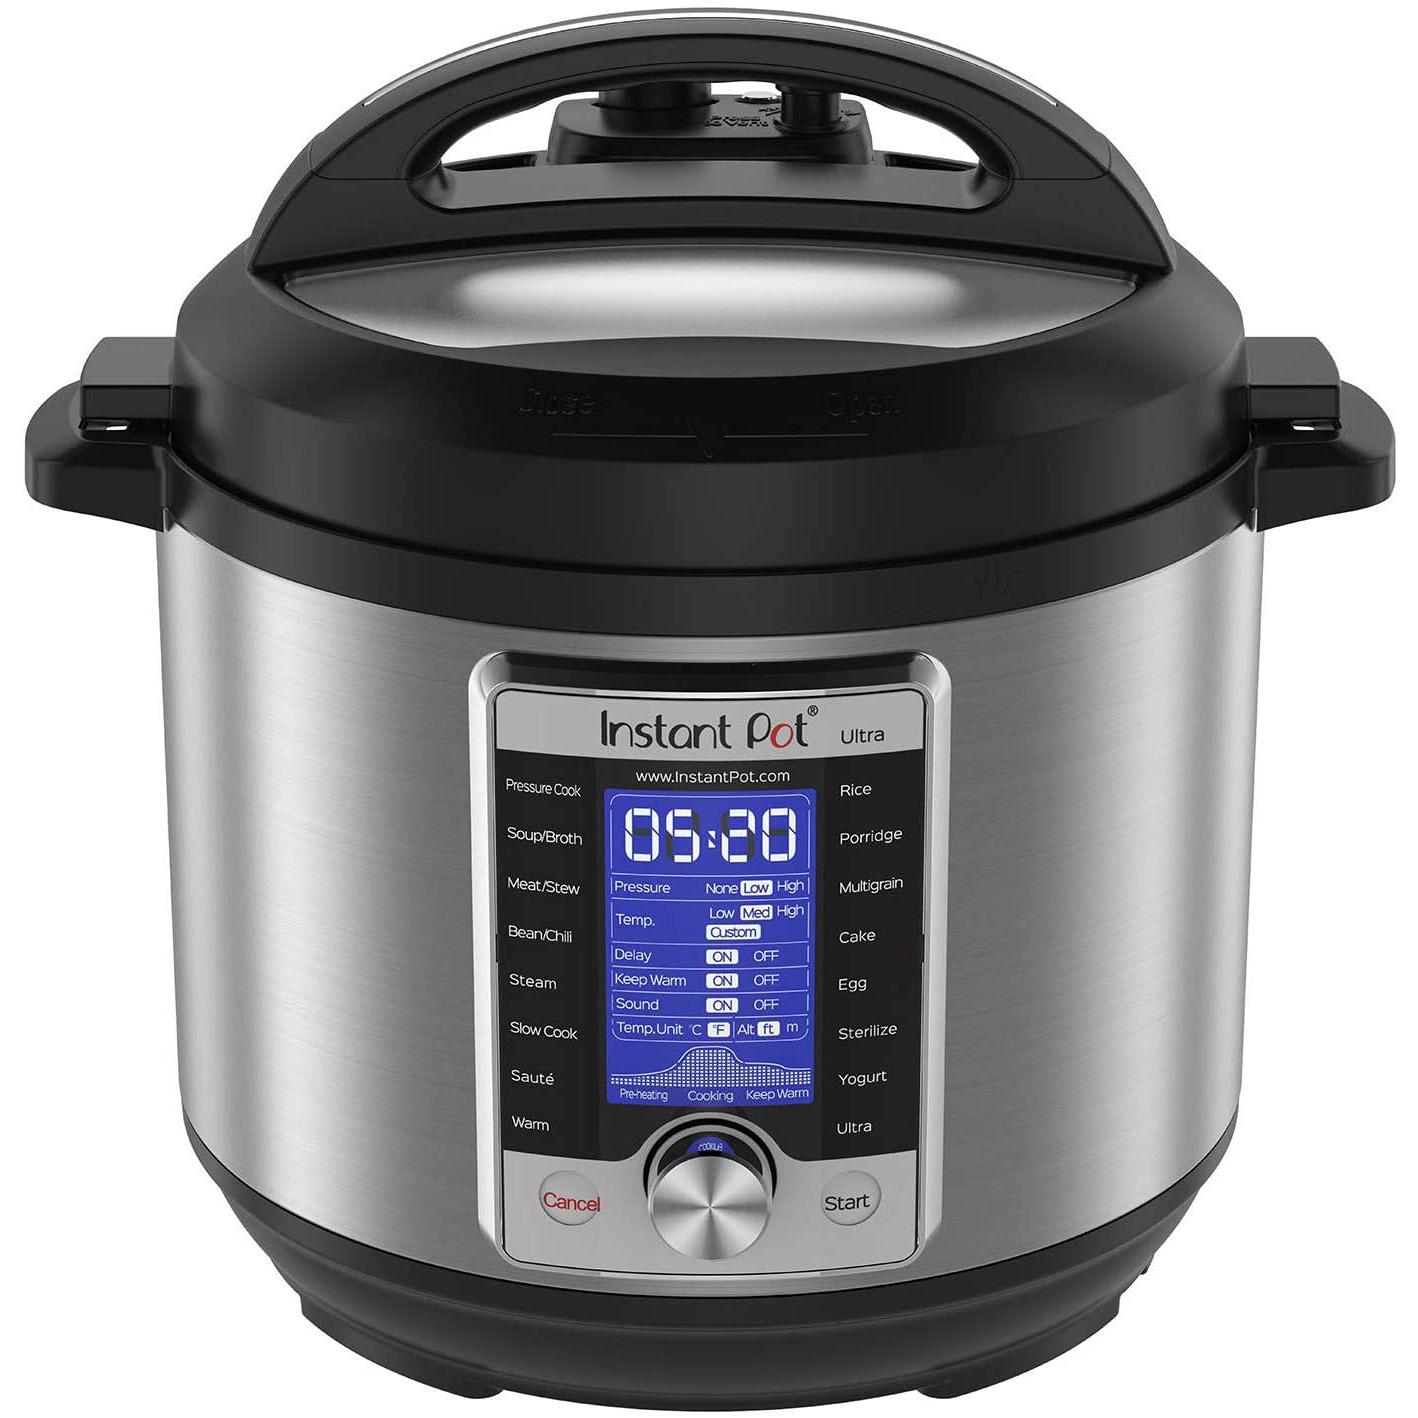 Instant Pot Ultra 6qt 10-in-1 Electric Pressure Cooker for $99.99 Shipped